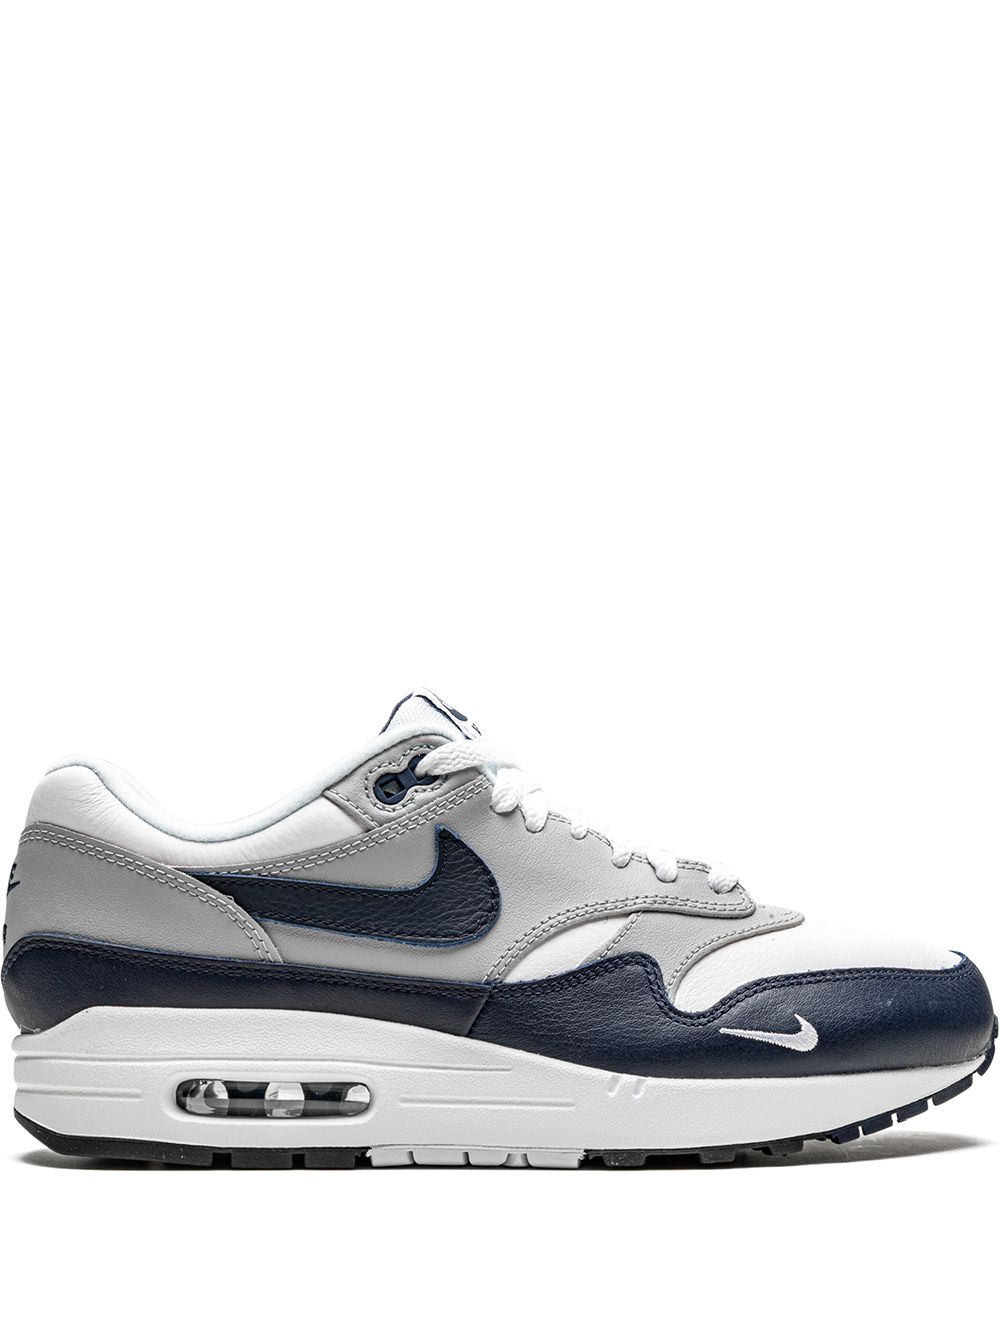 Nike Air Max 1 LV8 Obsidian - Leather Pack DH4059-100